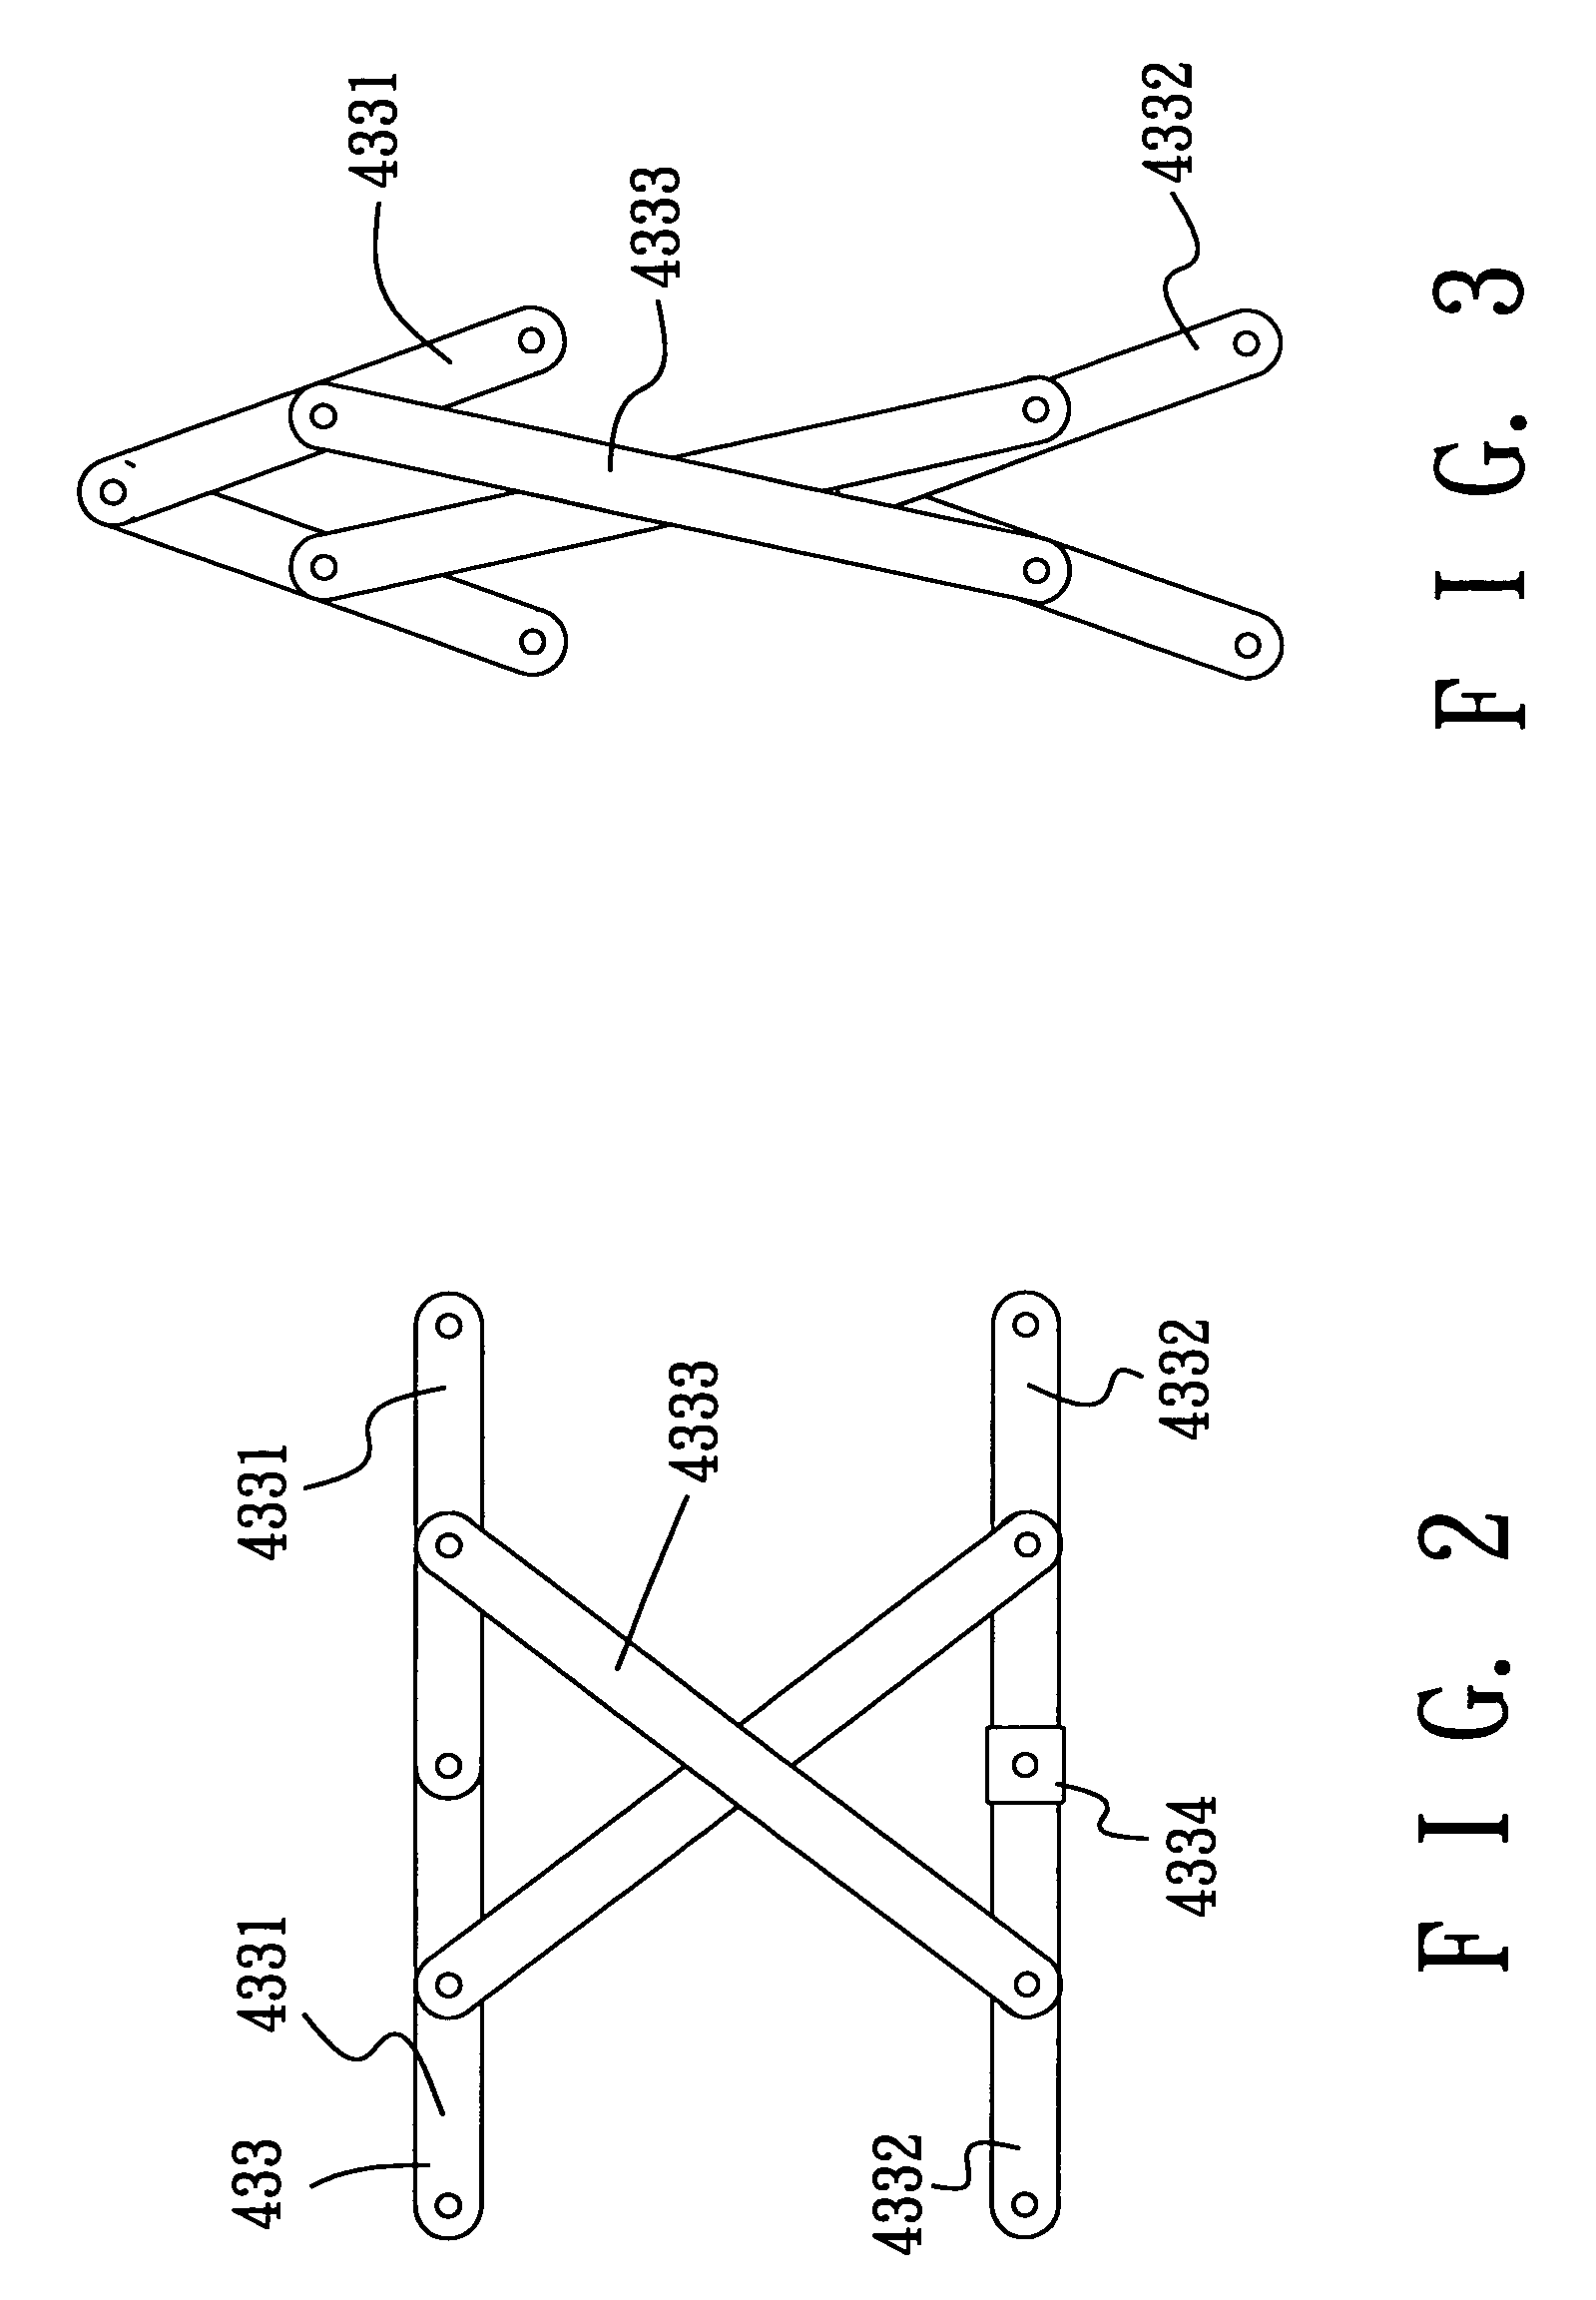 Stroller frame foldable in two directions